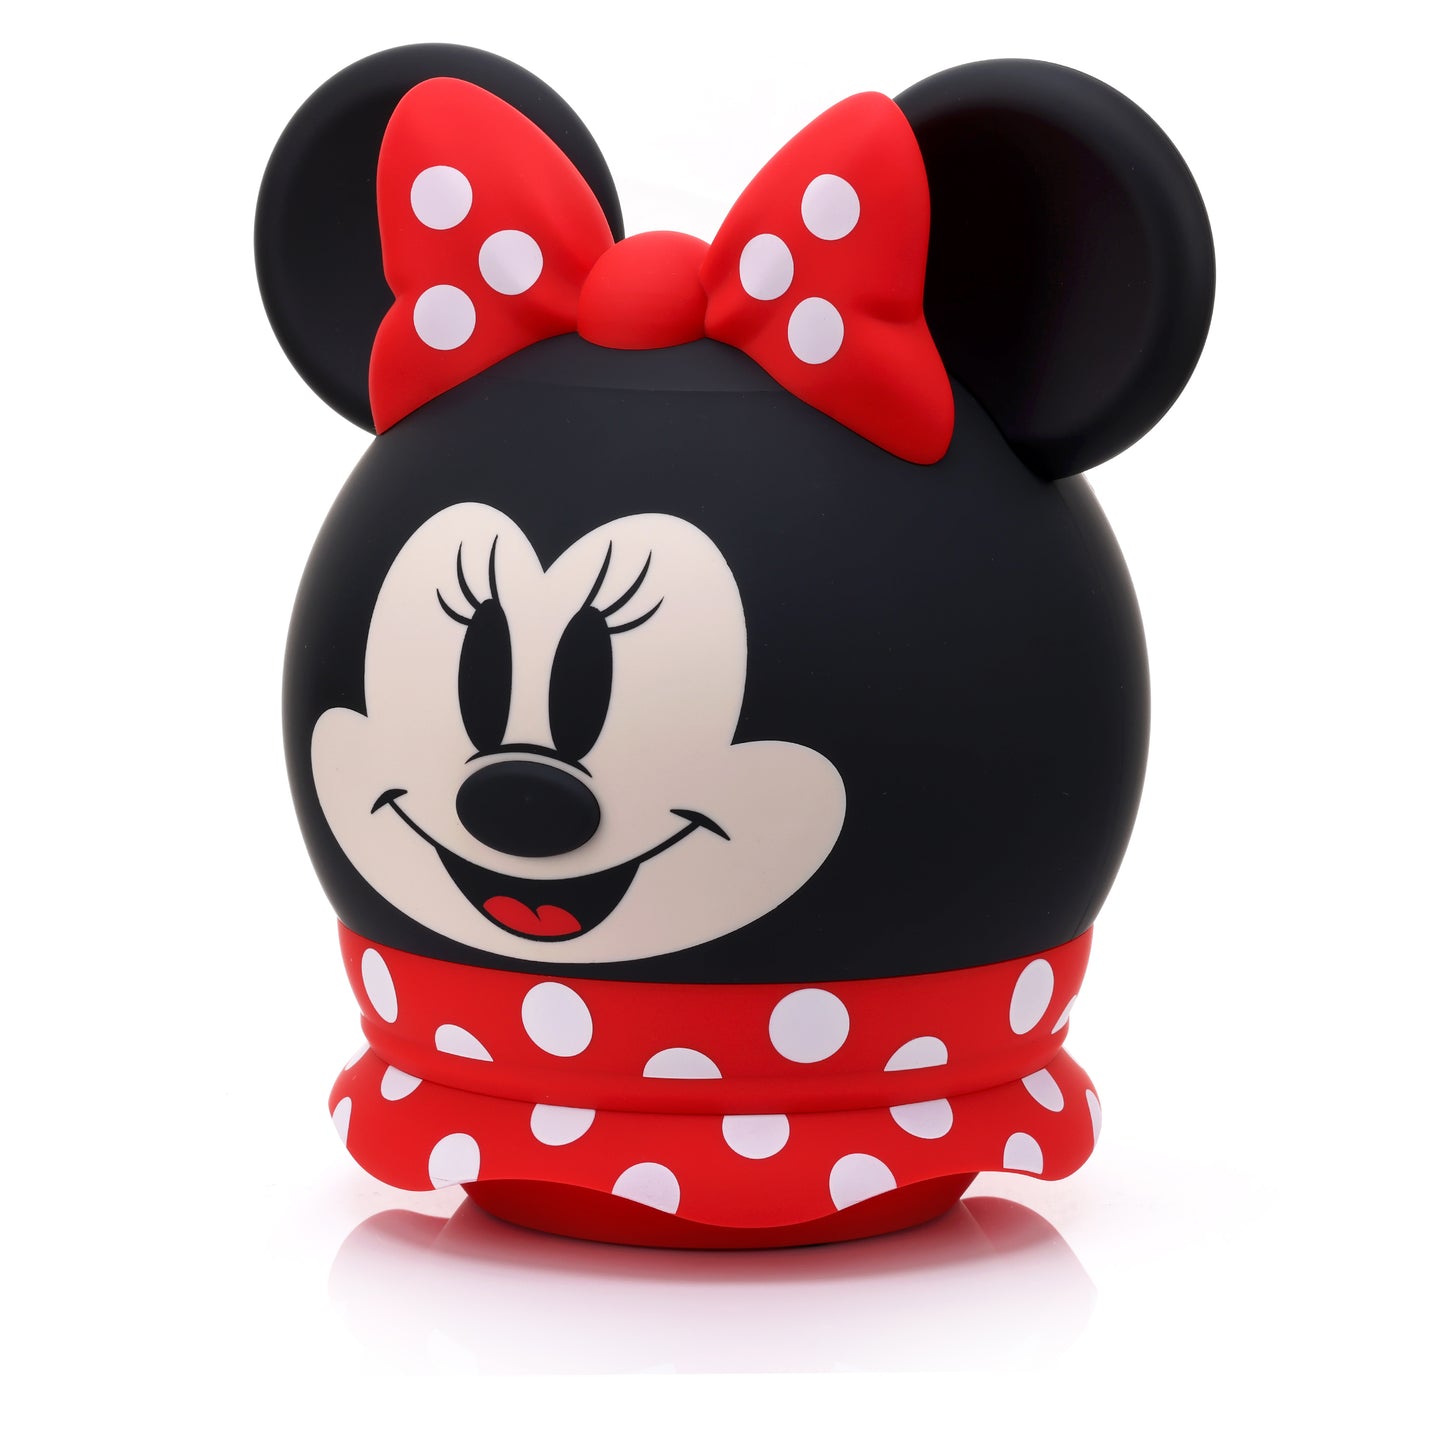 Bigger 8" Minnie Mouse